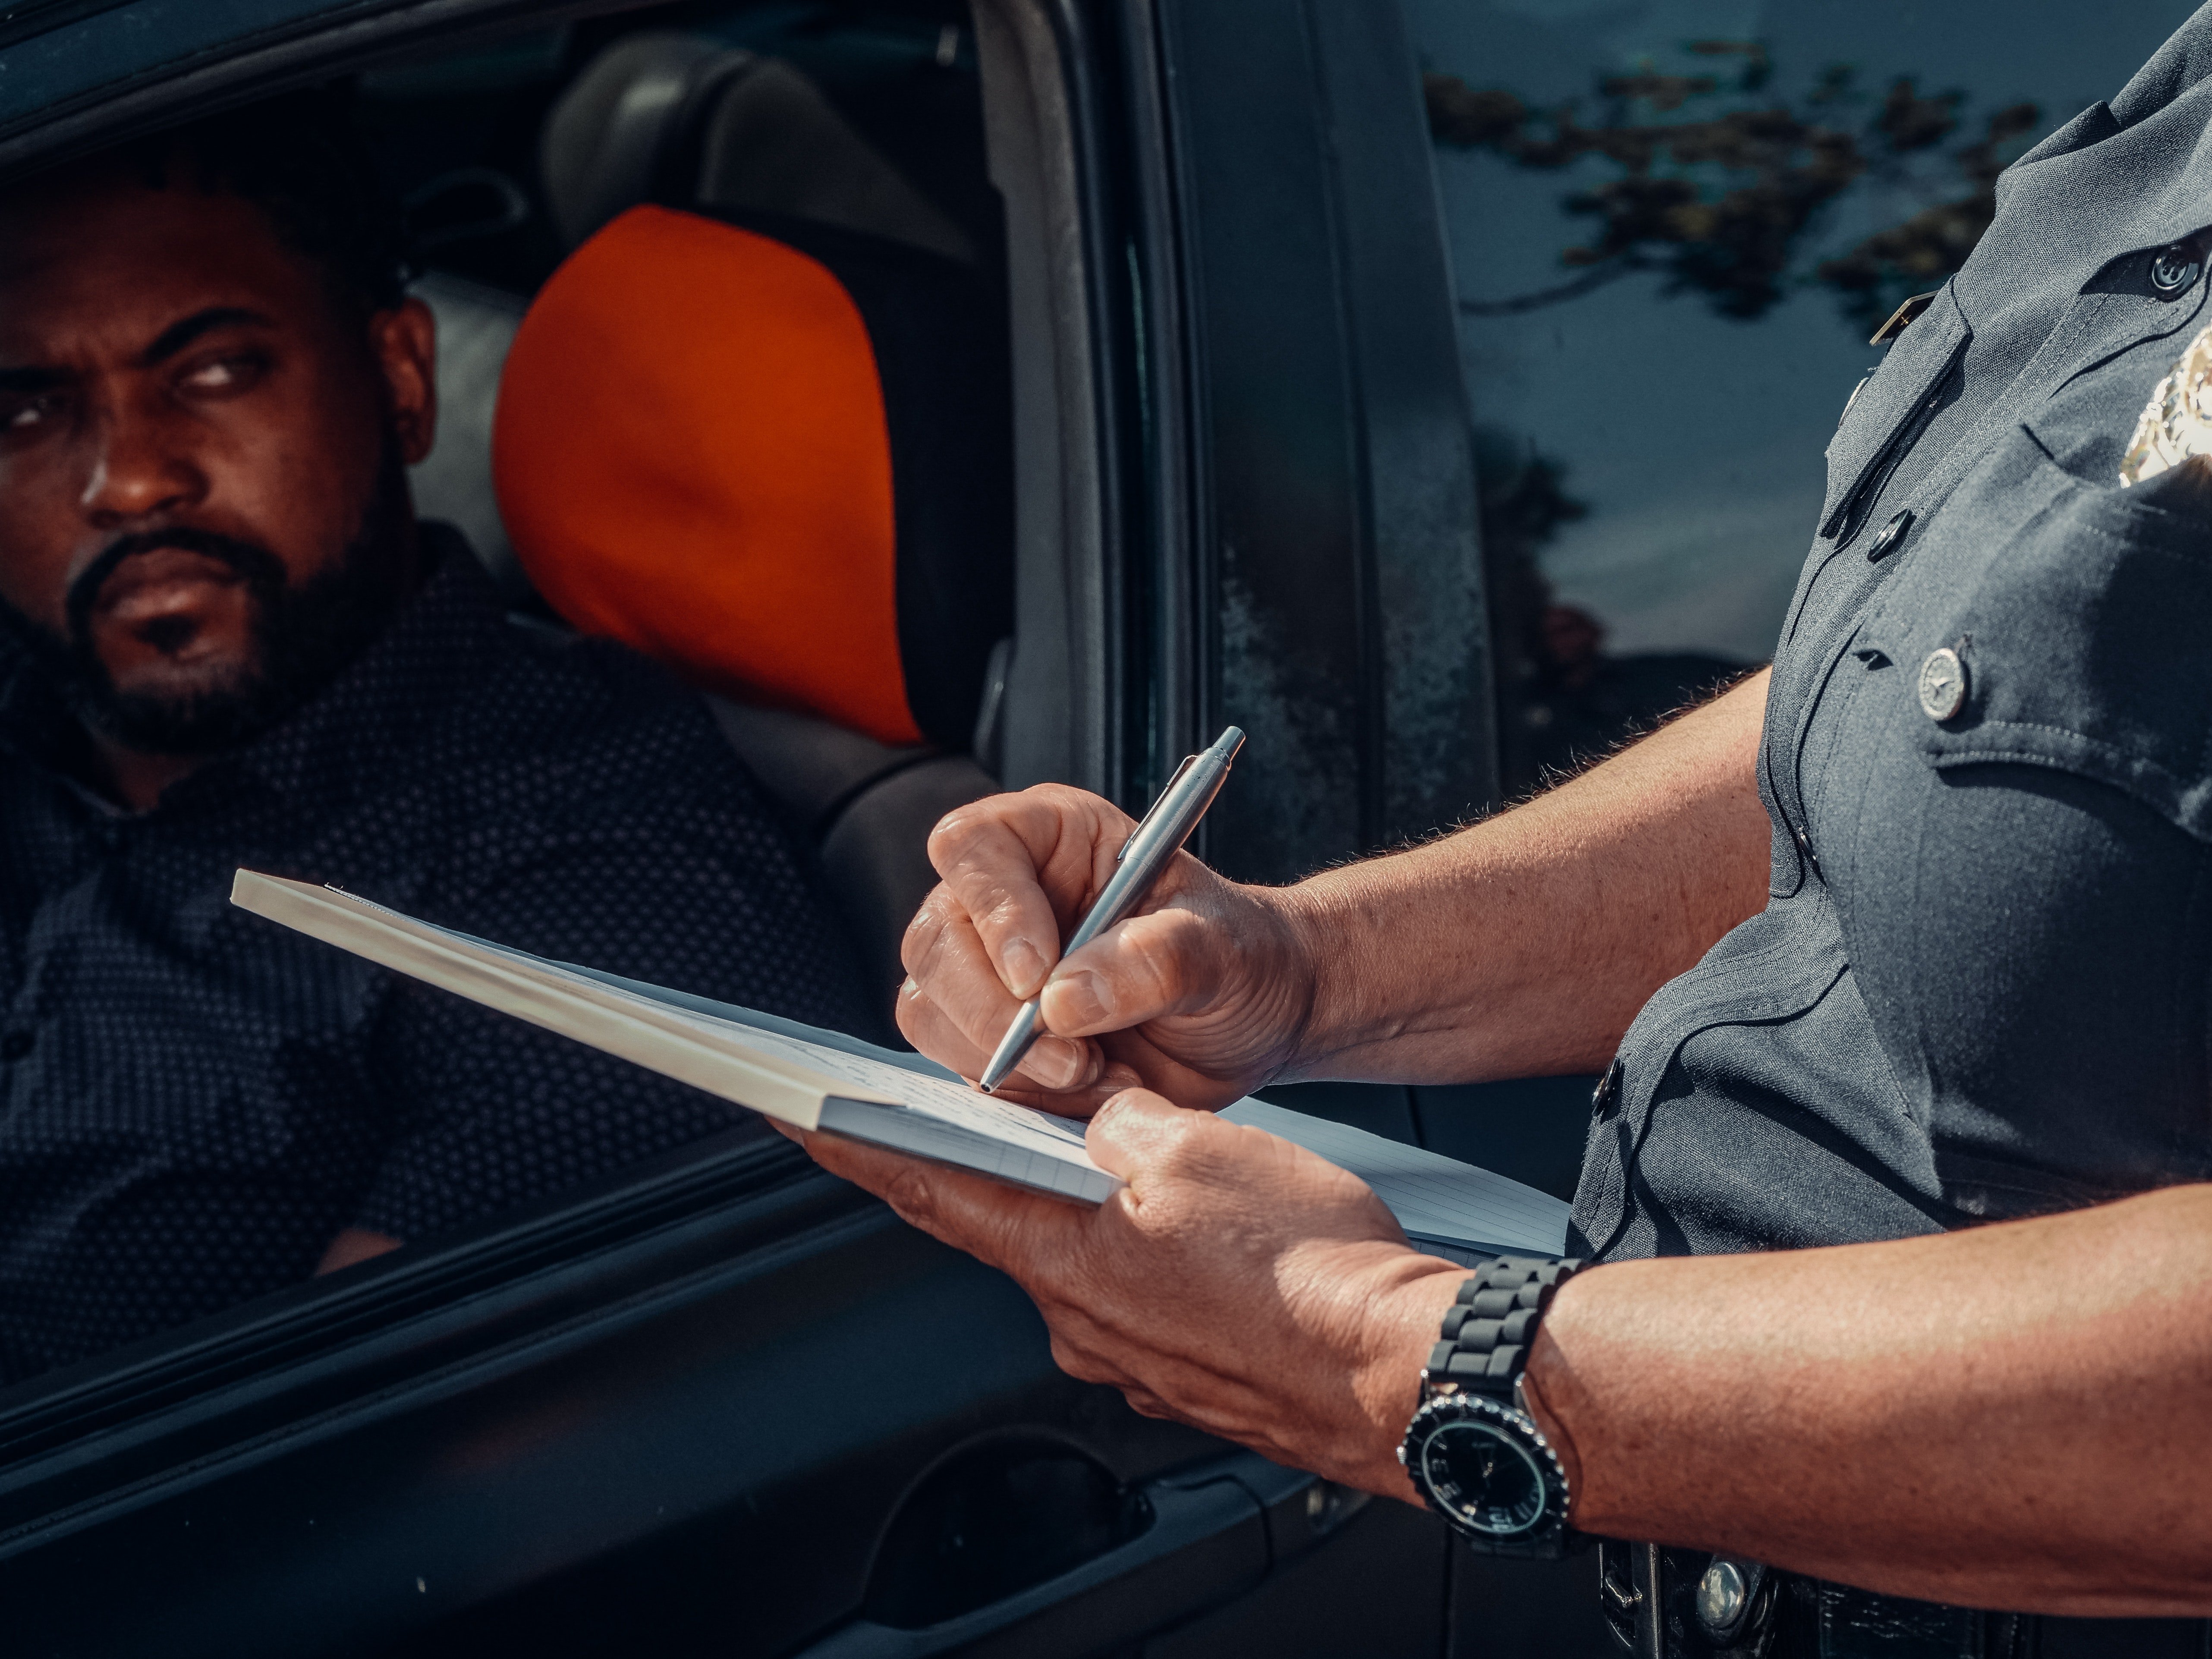 The police officer asked the man to show him the car's papers. | Photo: Pexels/Kindel Media